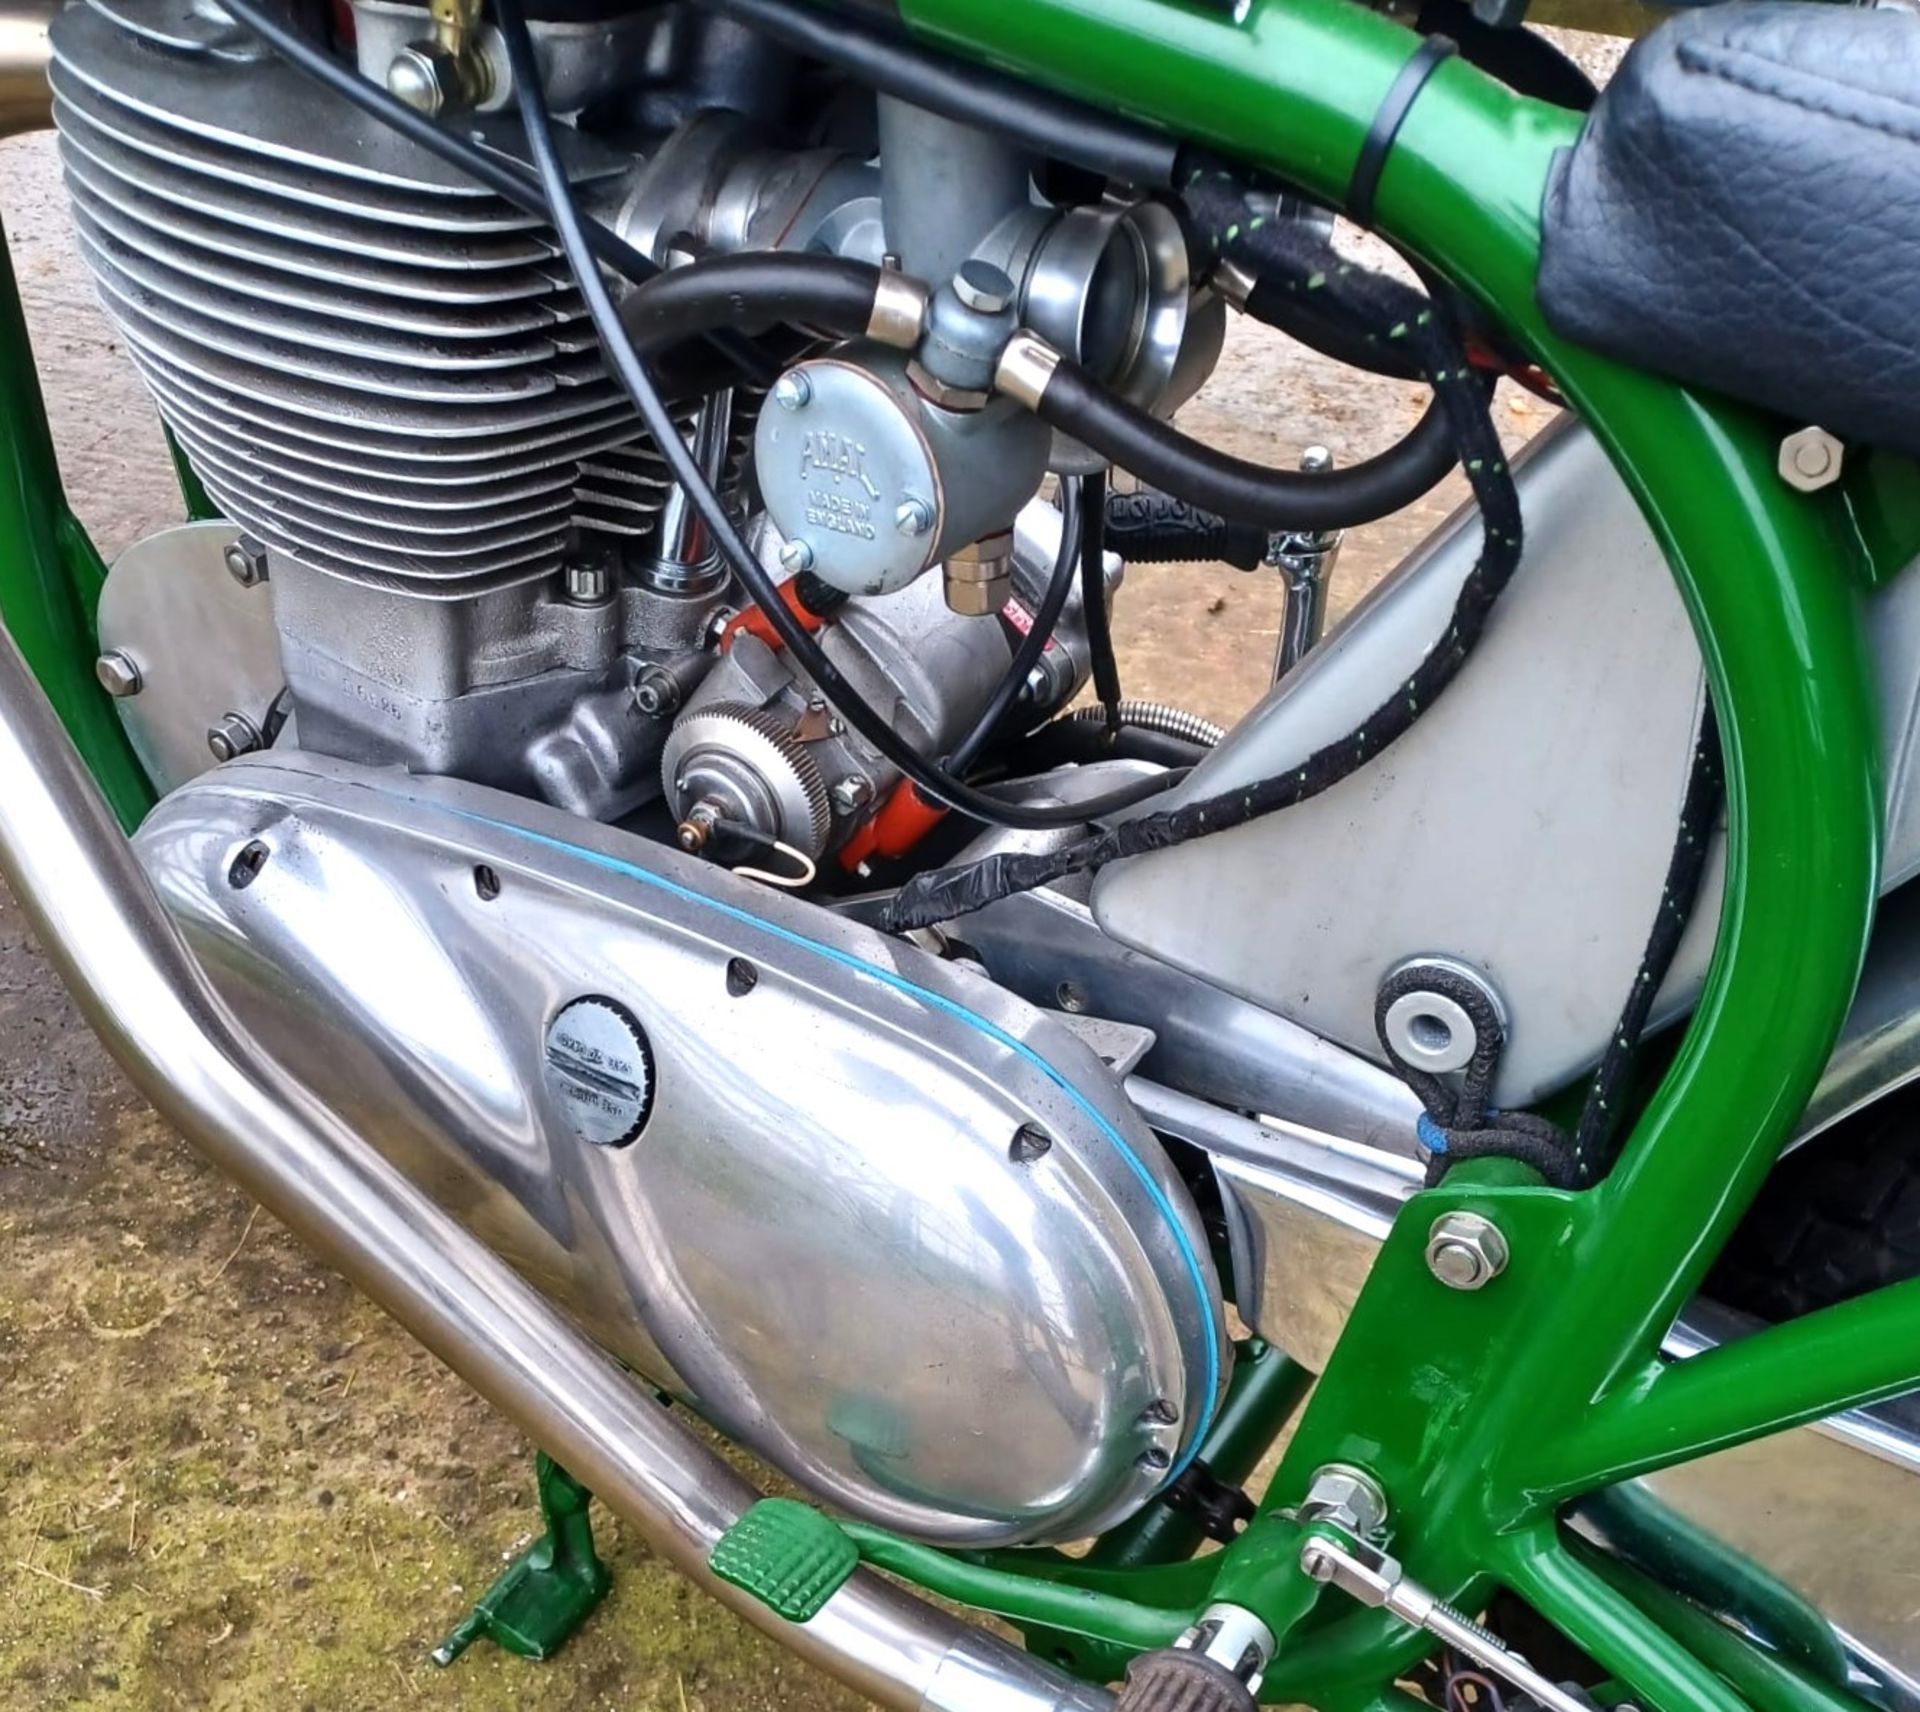 1958 TRITON 650cc Registration Number: 482 XVW Frame Number: TBA Recorded Mileage: 14 miles - - Image 5 of 16